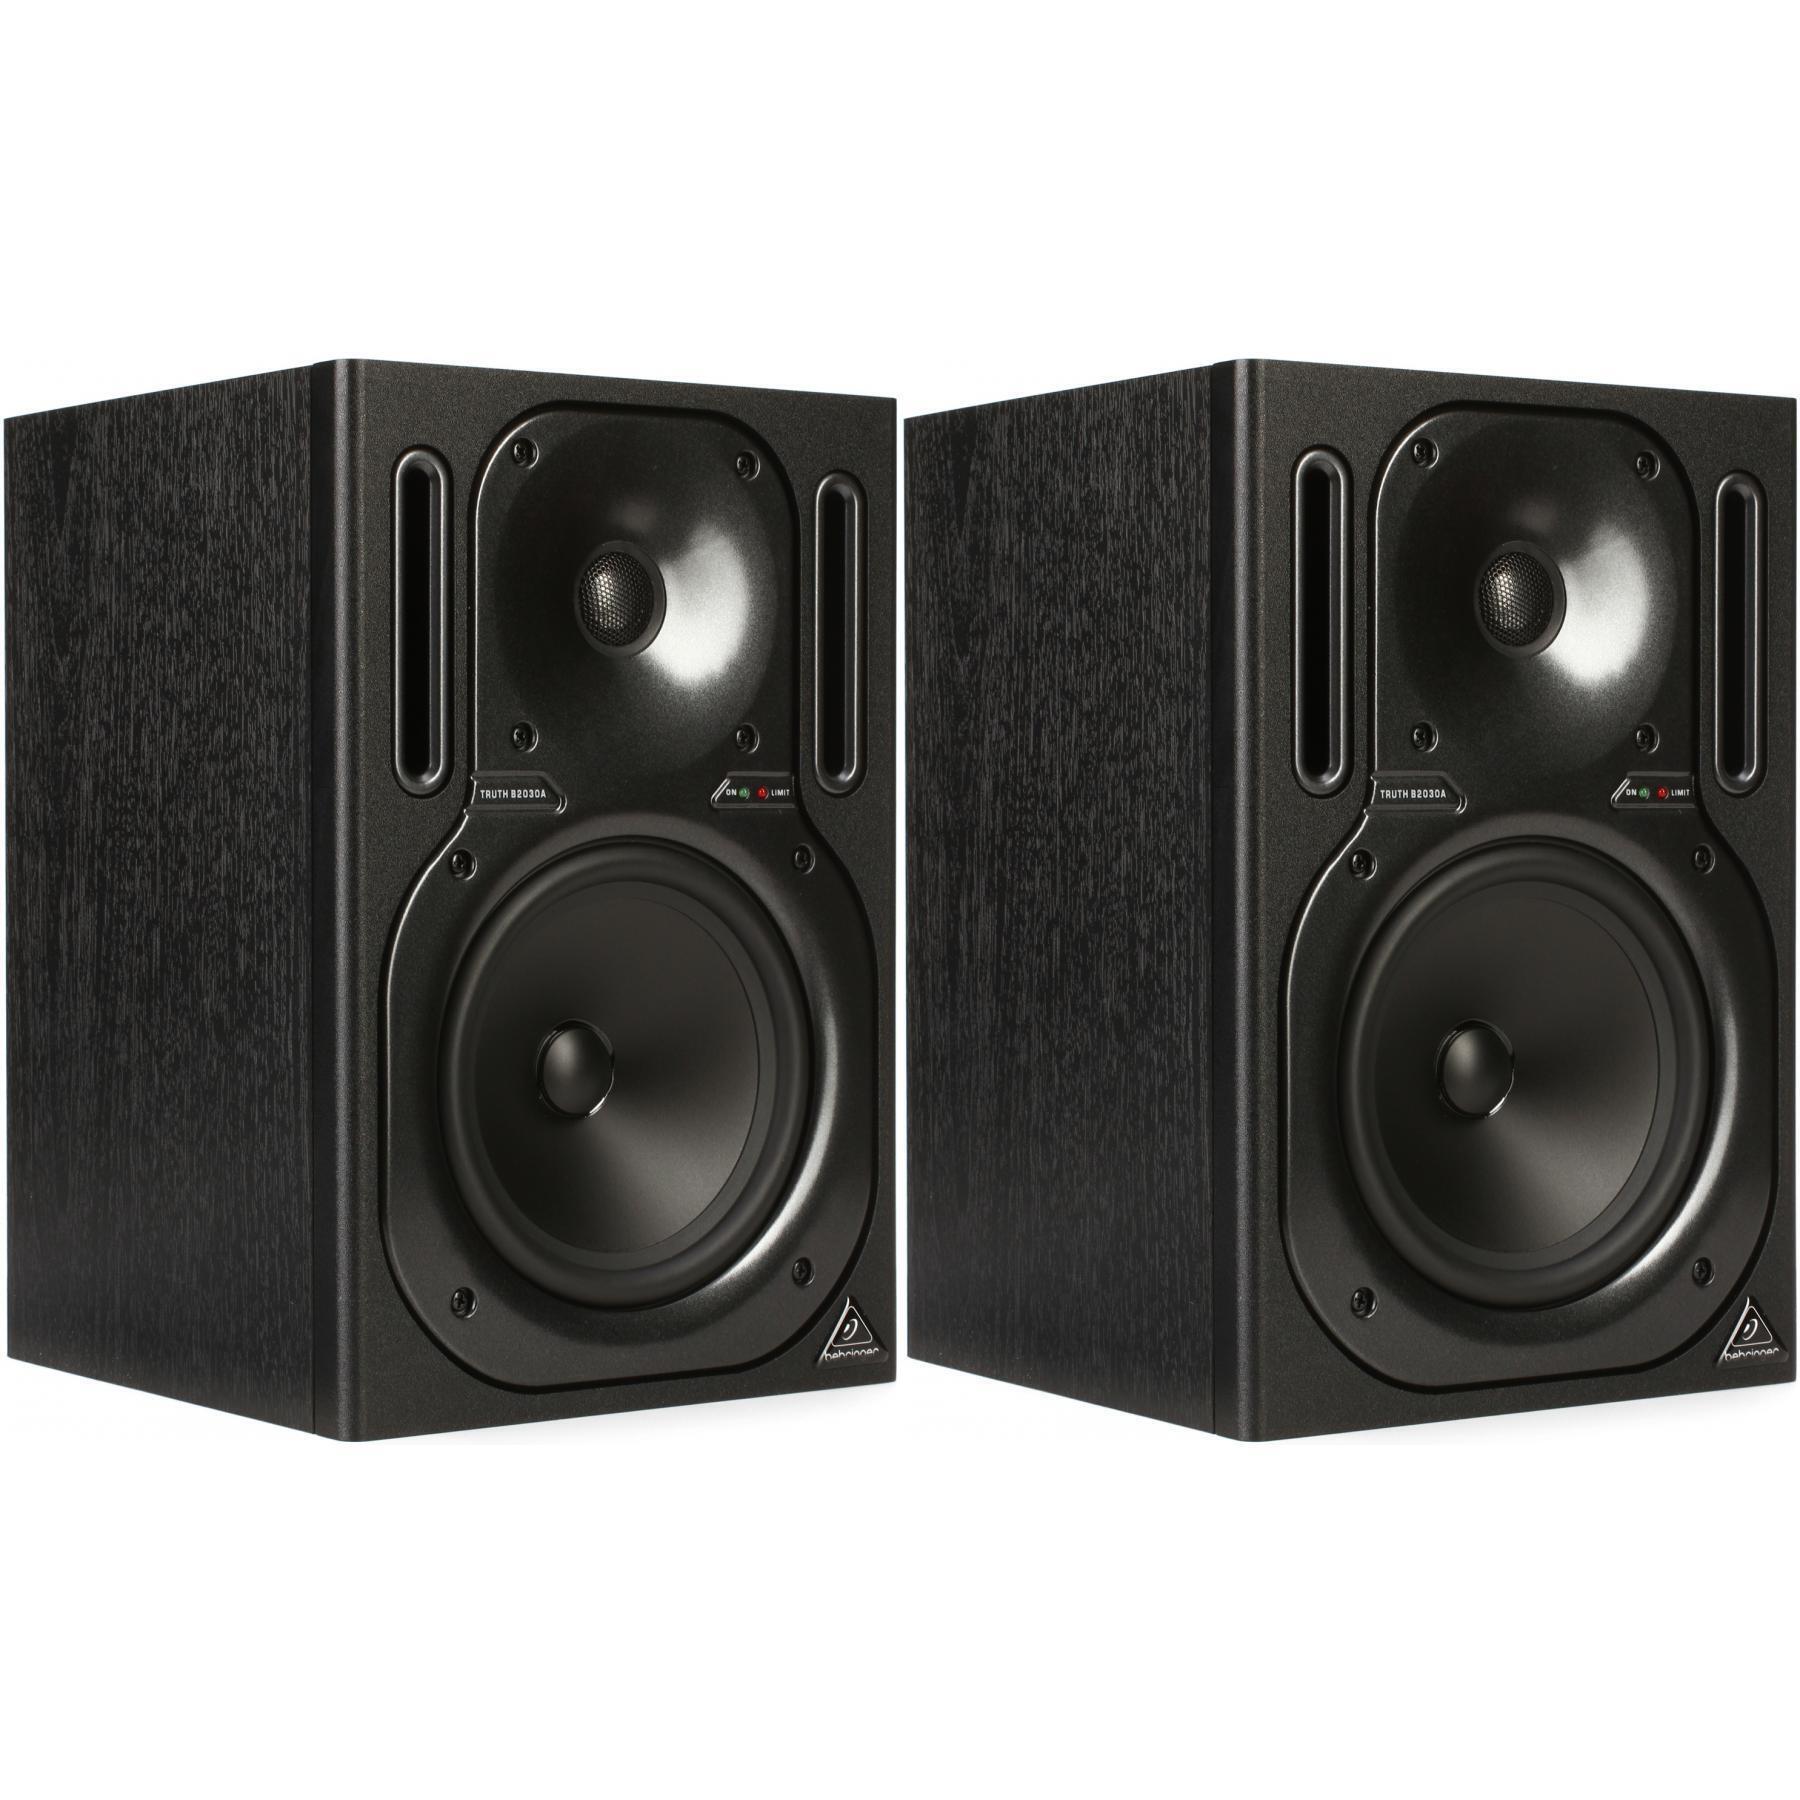 Behringer Truth B2030A 6.75 inch Powered Studio Monitor - Pair 